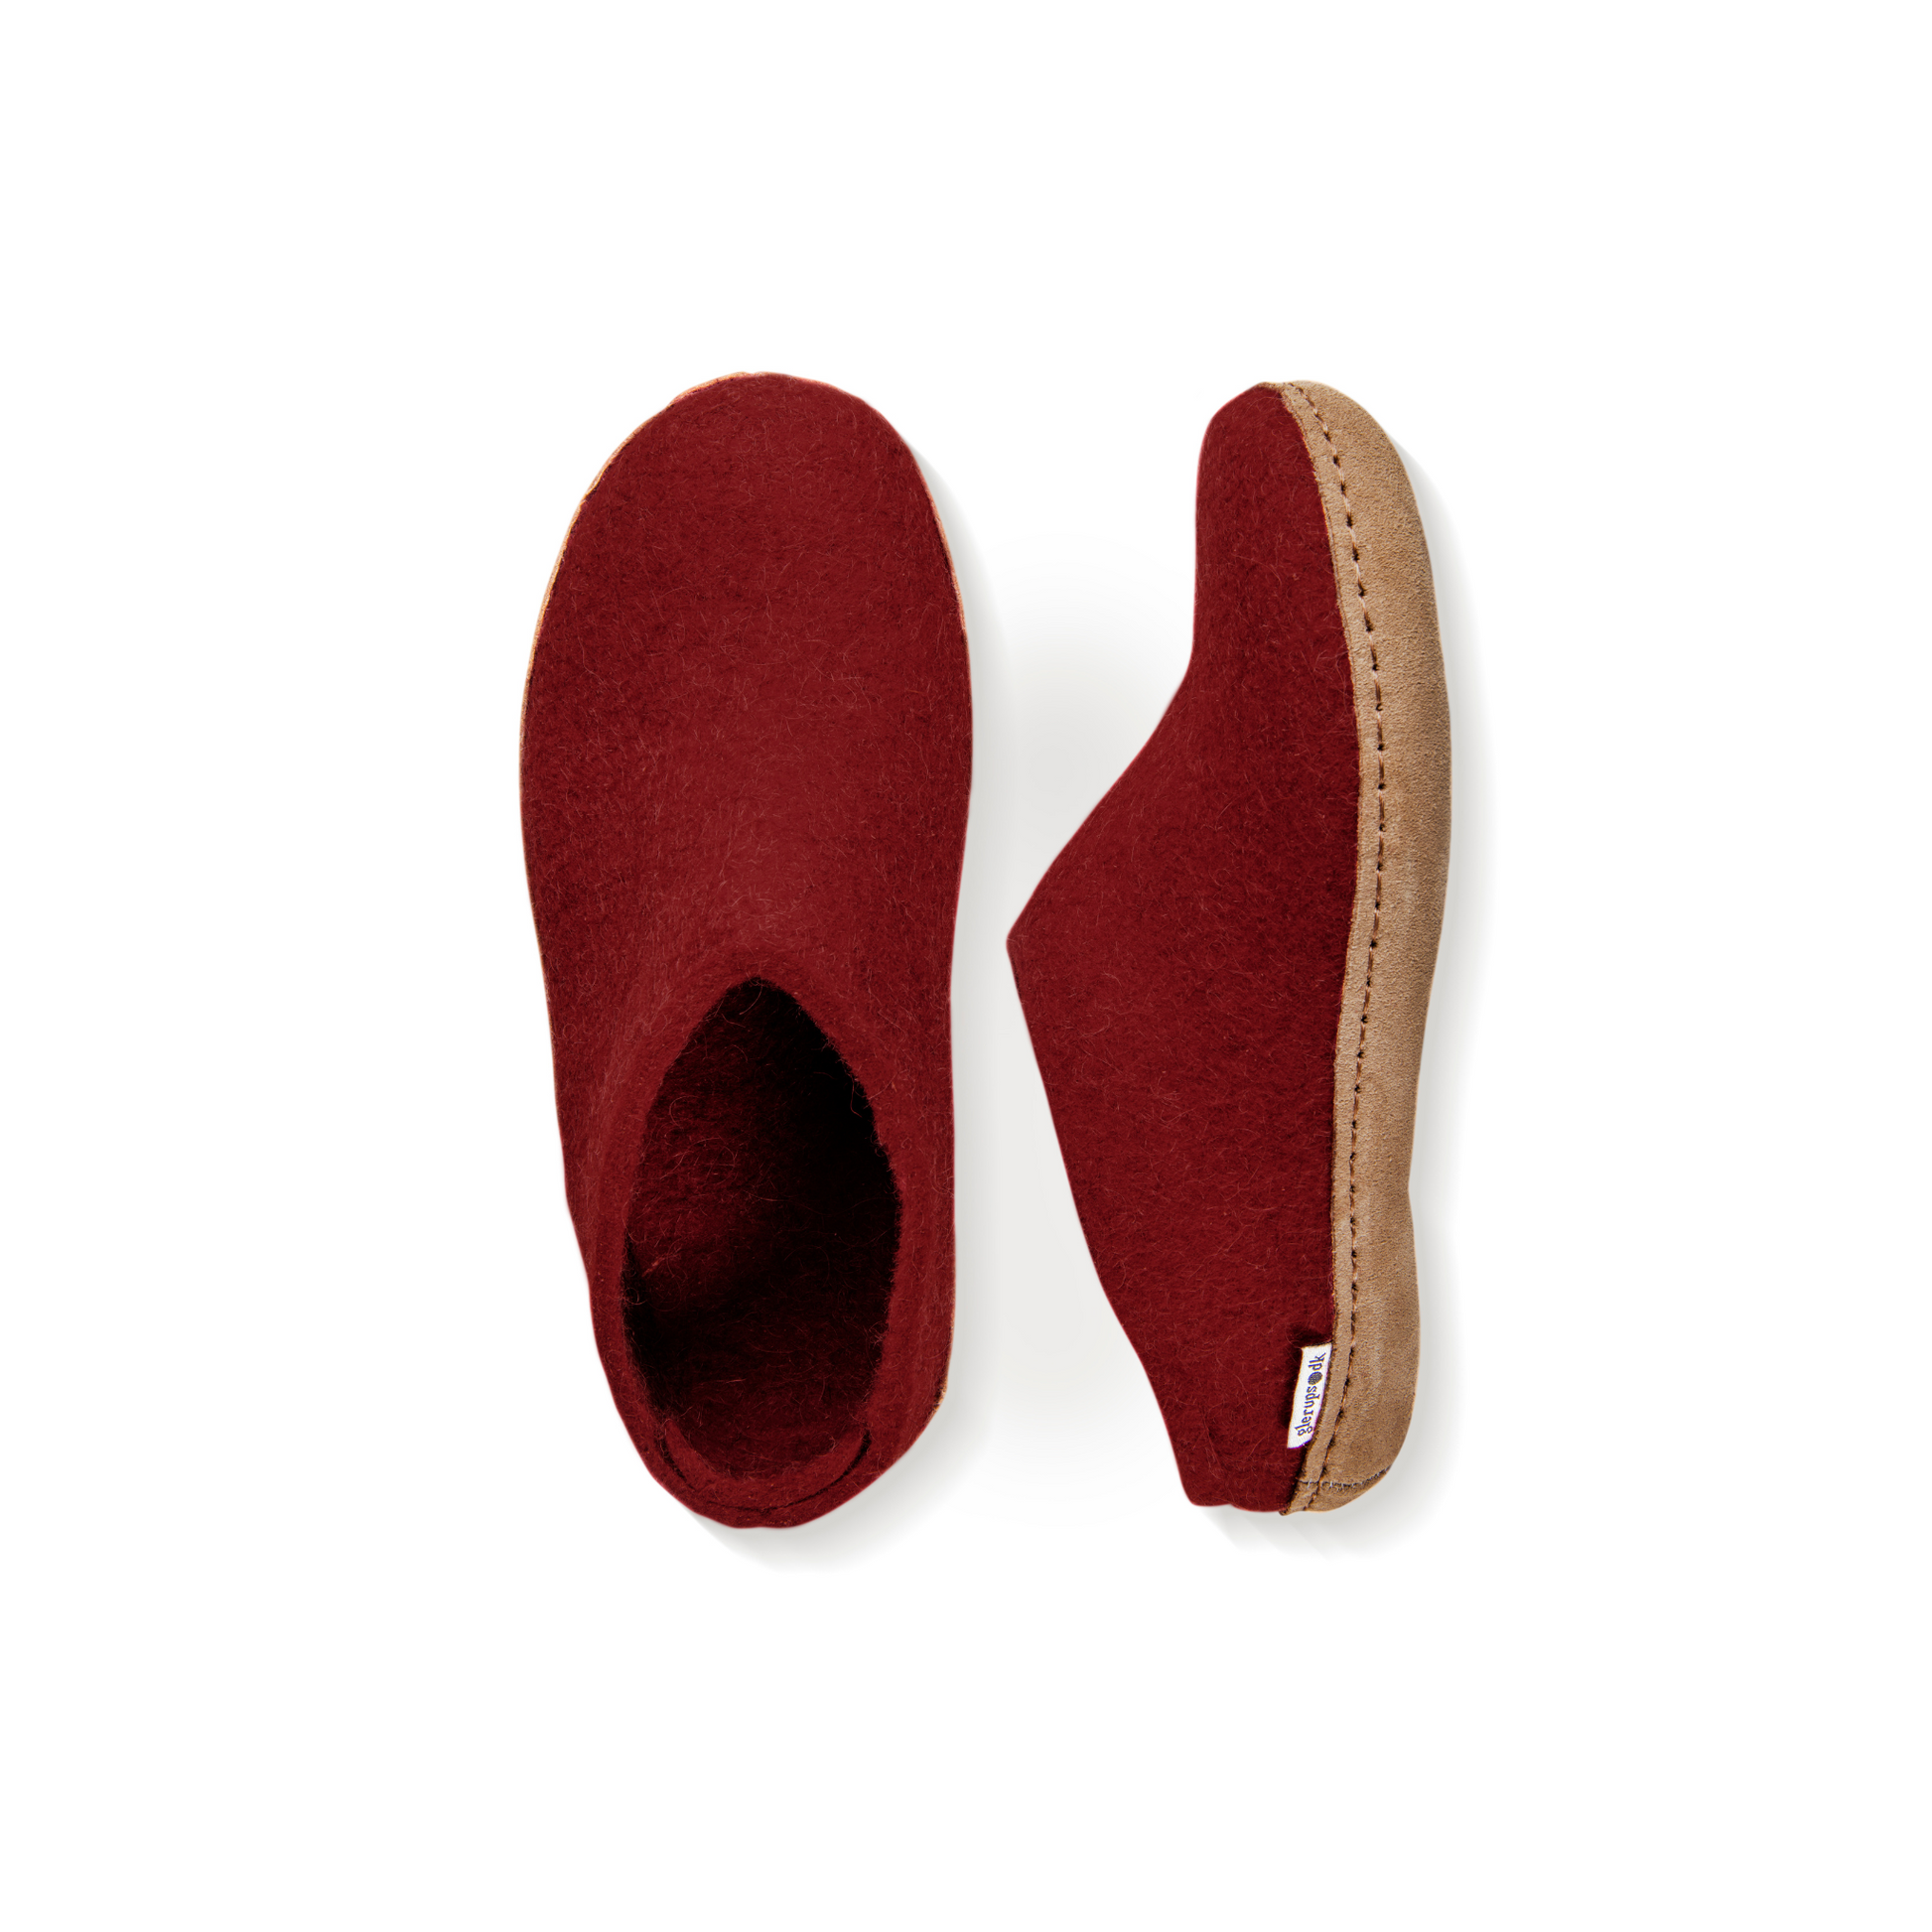 An overhead view of two deep crimson felted wool slippers. One is pictured straight on, showing the top face of the slipper, while the other lays on its side, showing the profile with tan leather sole with a row of stitching.